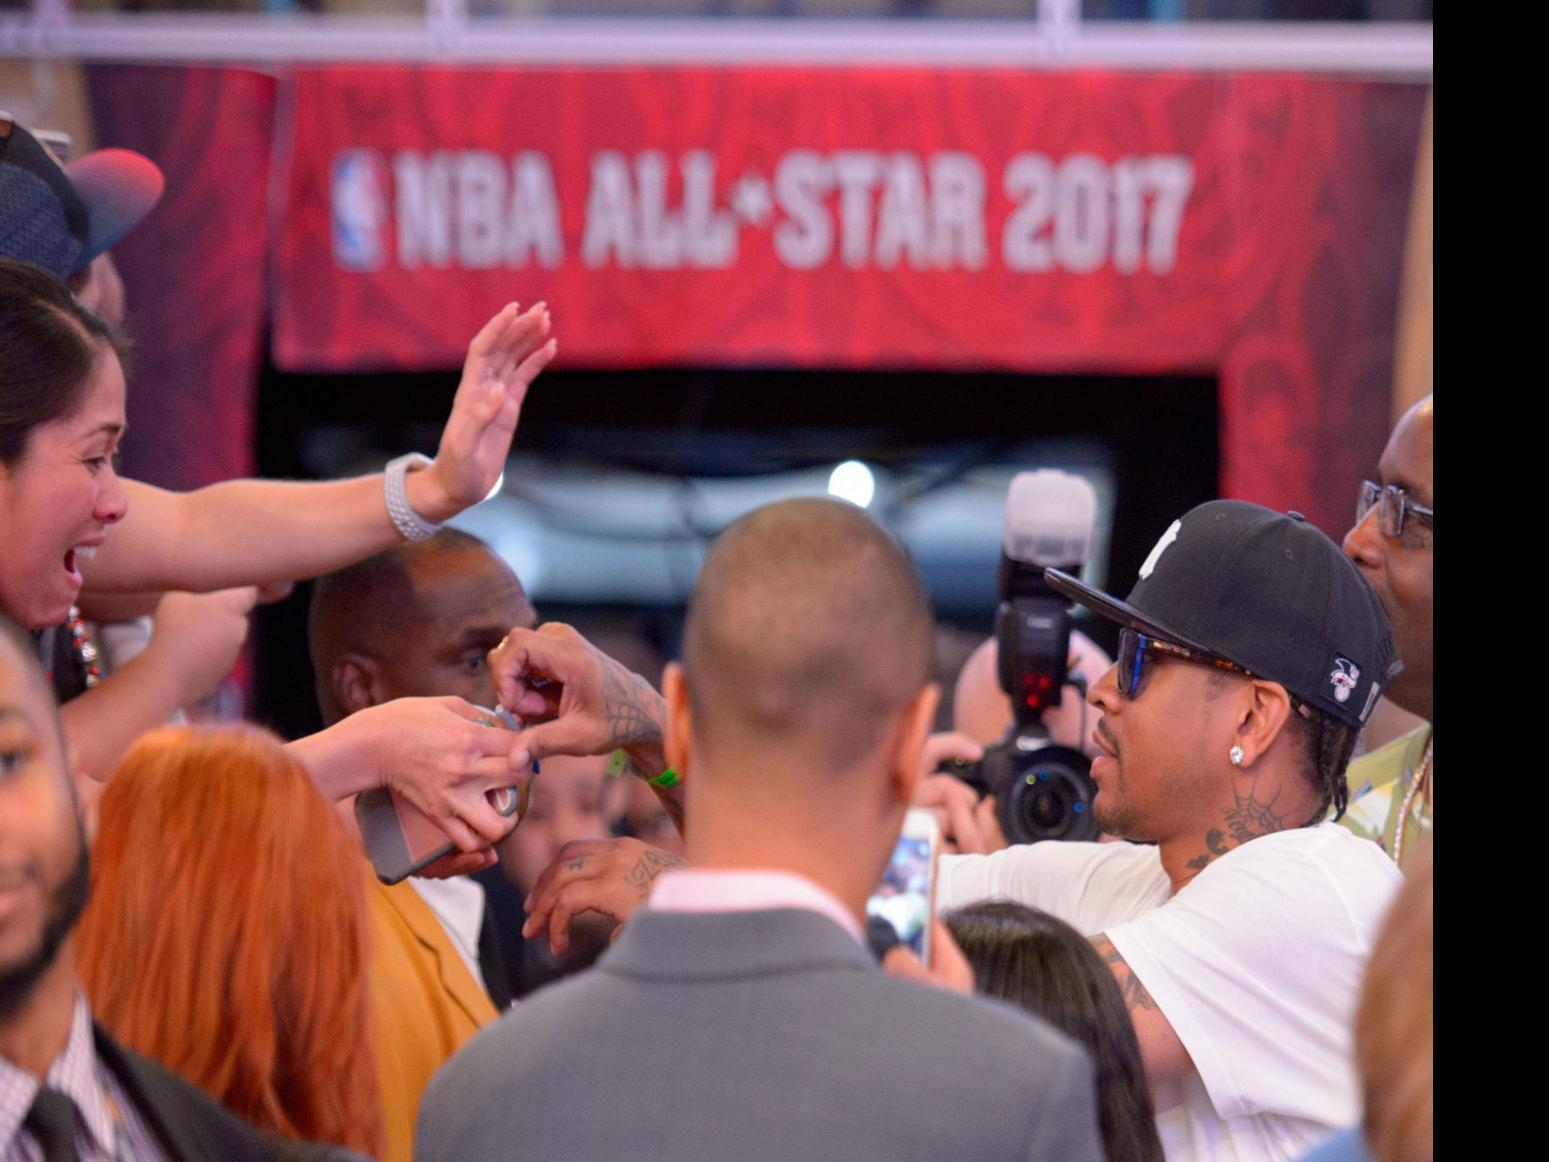 Study estimates NBA All-Star Game generated $44.9 million in spending to  Louisiana, Business News